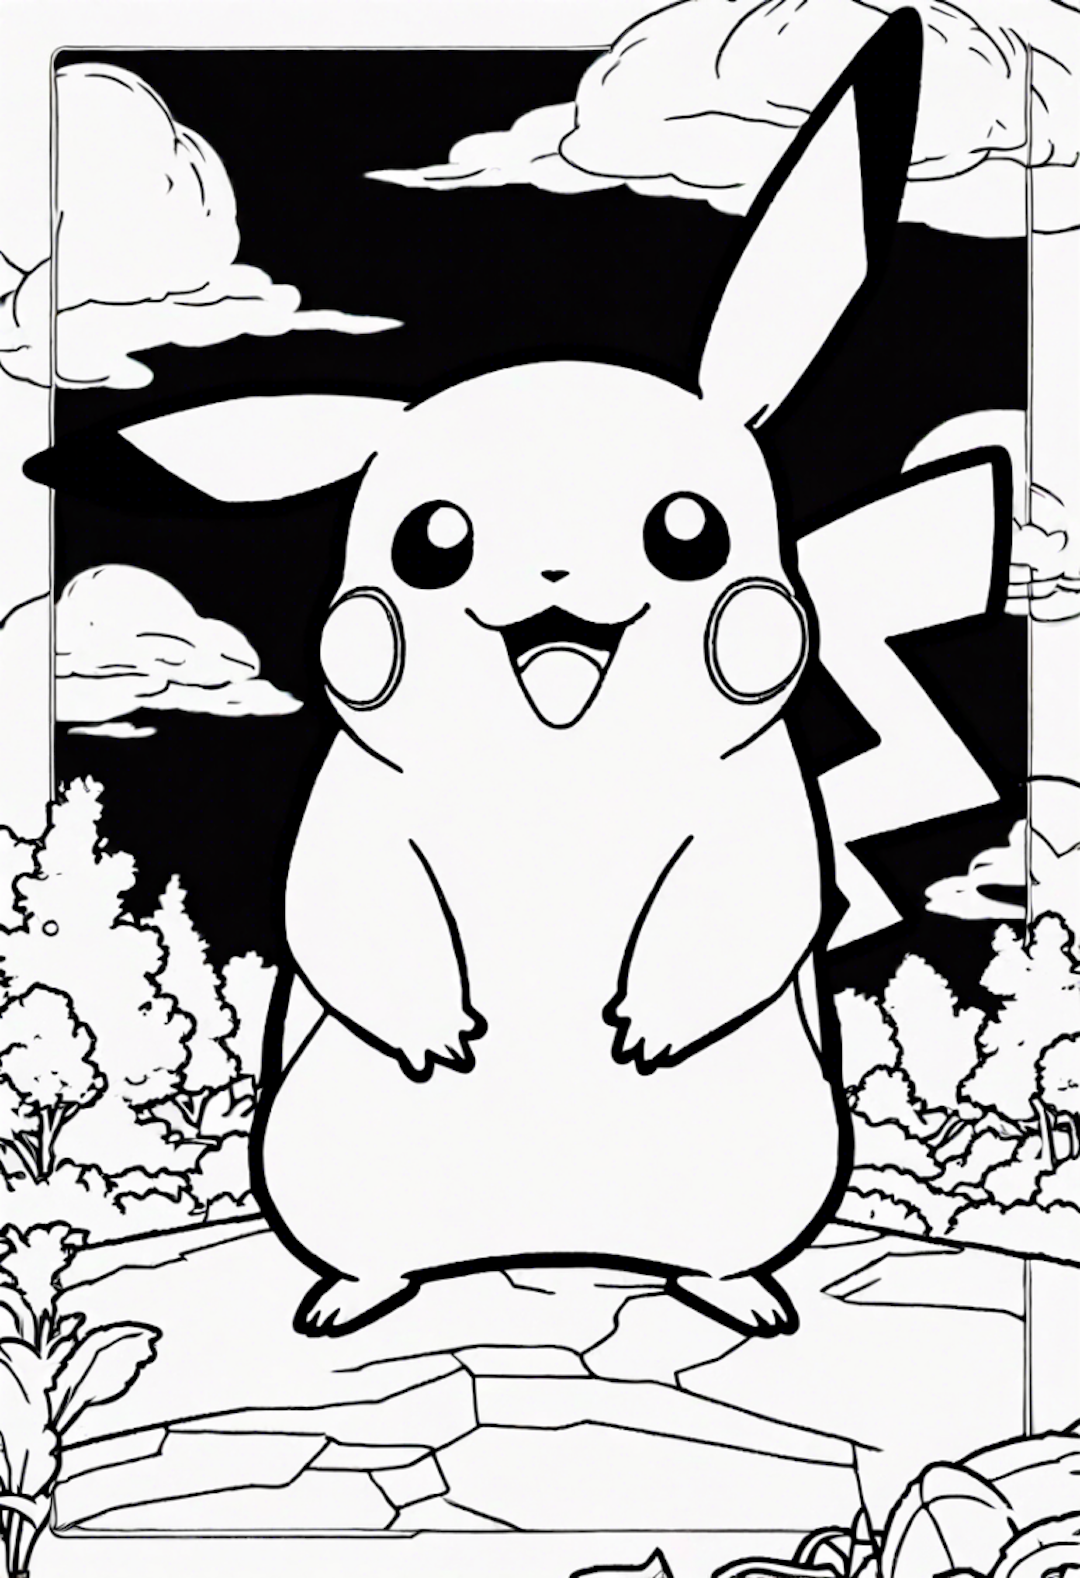 Pikachu in the Enchanted Forest coloring pages